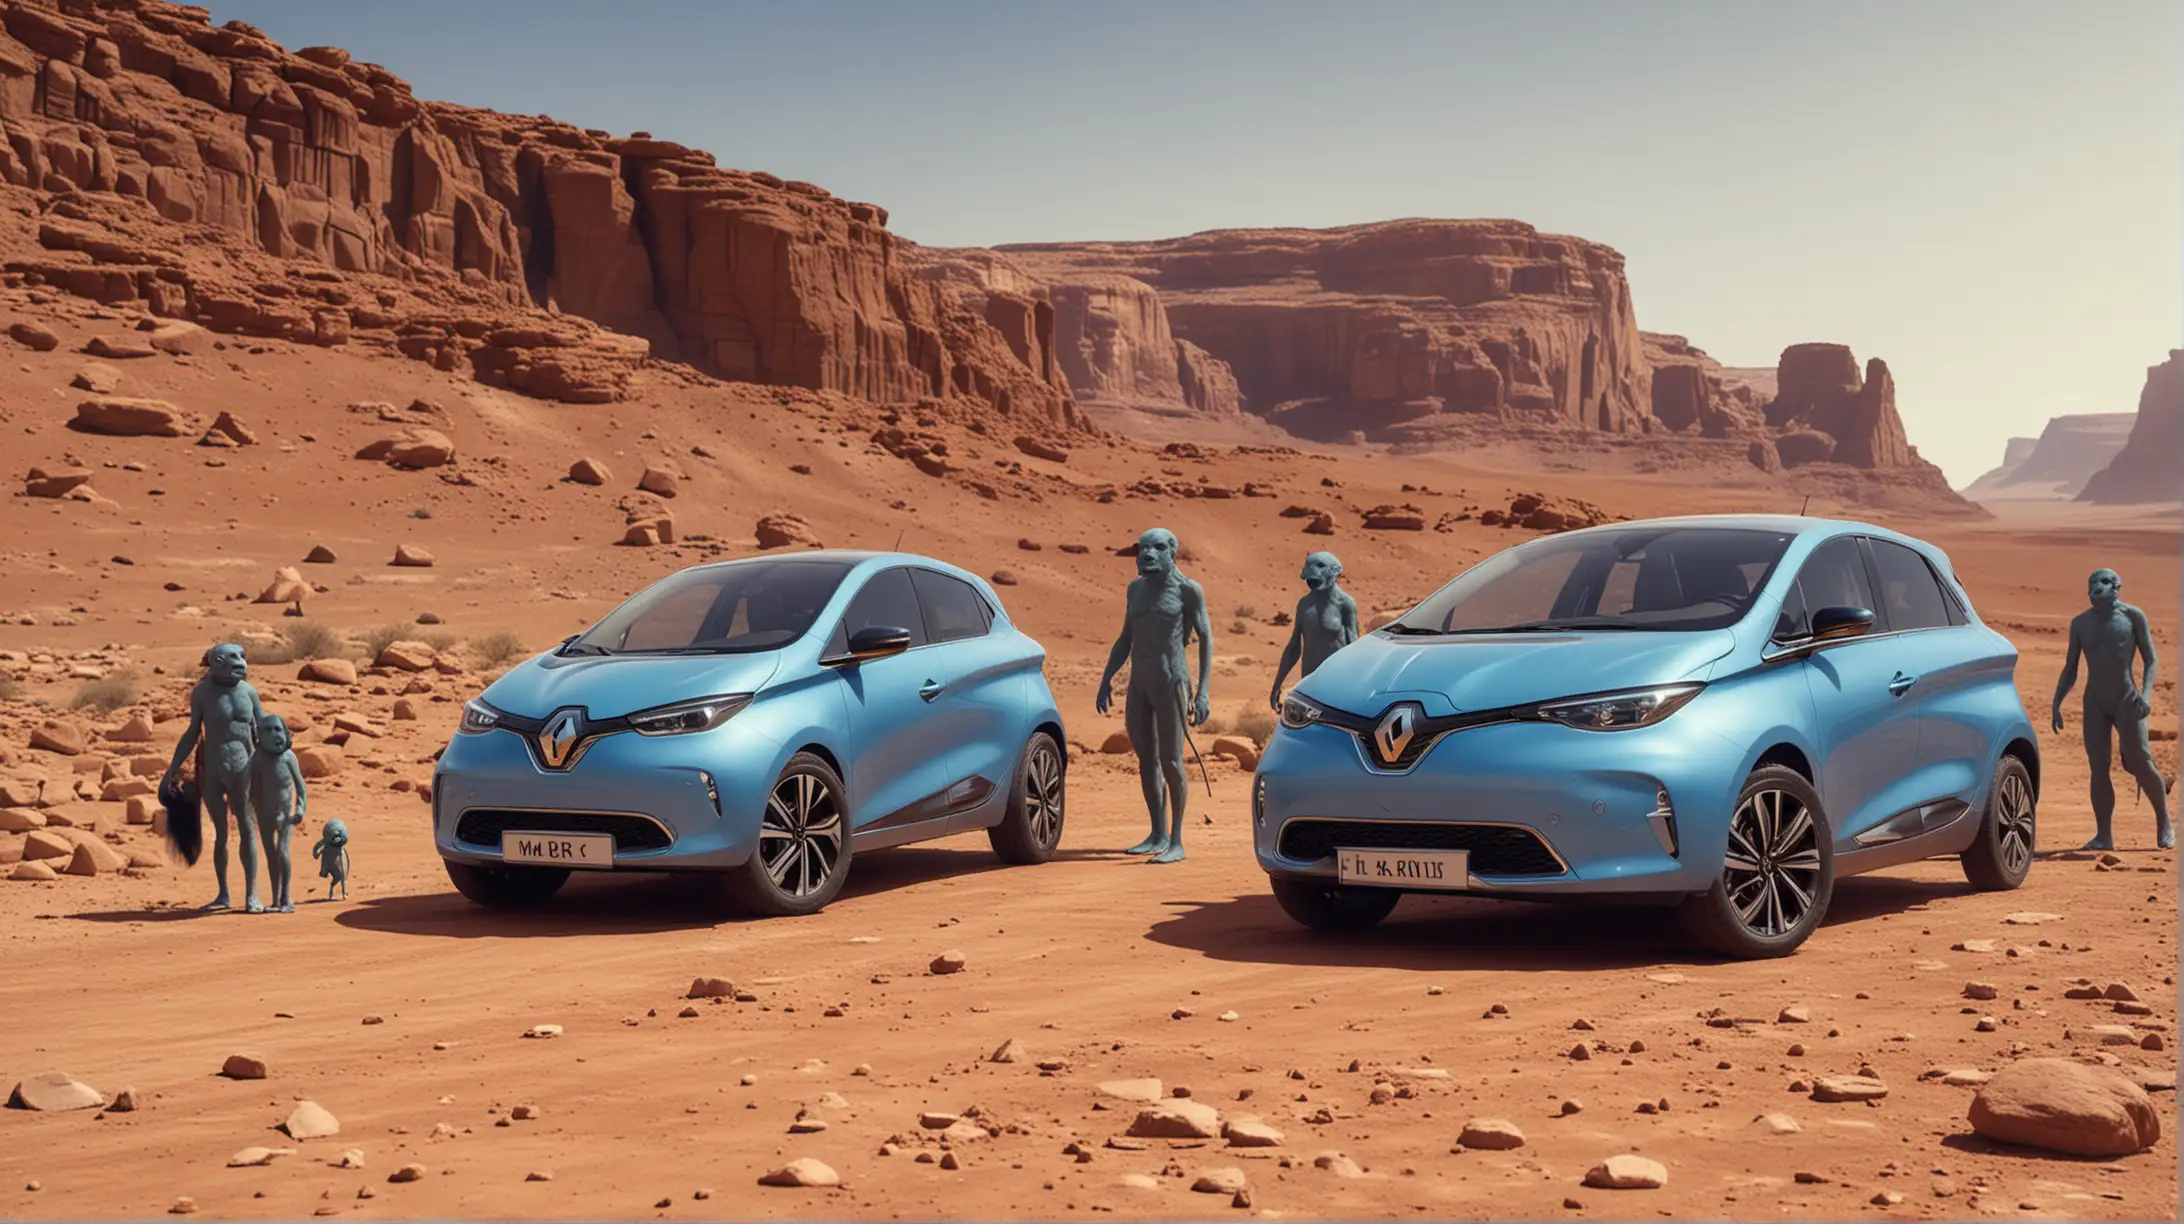 Neanderthal Family with Blue Renault Zoe 2020 on Mars